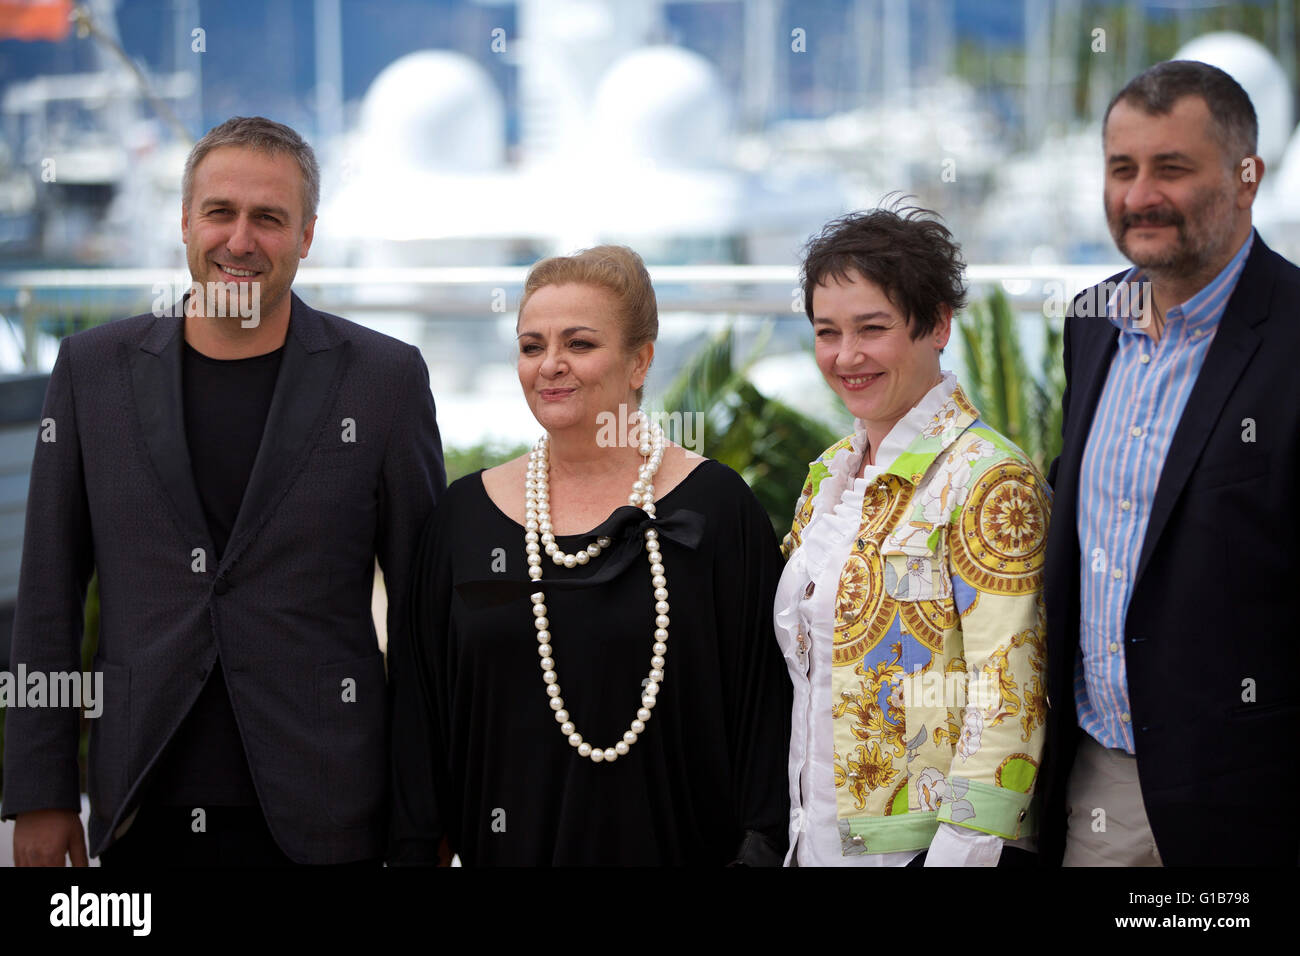 Cannes, France. 12th May, 2016. Cast members Mimi Branescu, Dana Dogaru, producer Anca Puiu and director Cristi Puiu(from L to R) pose during a photocall for the film 'Sieranevada' in competition during the 69th Cannes Film Festival in Cannes, France, May 12, 2016. © Jin Yu/Xinhua/Alamy Live News Stock Photo